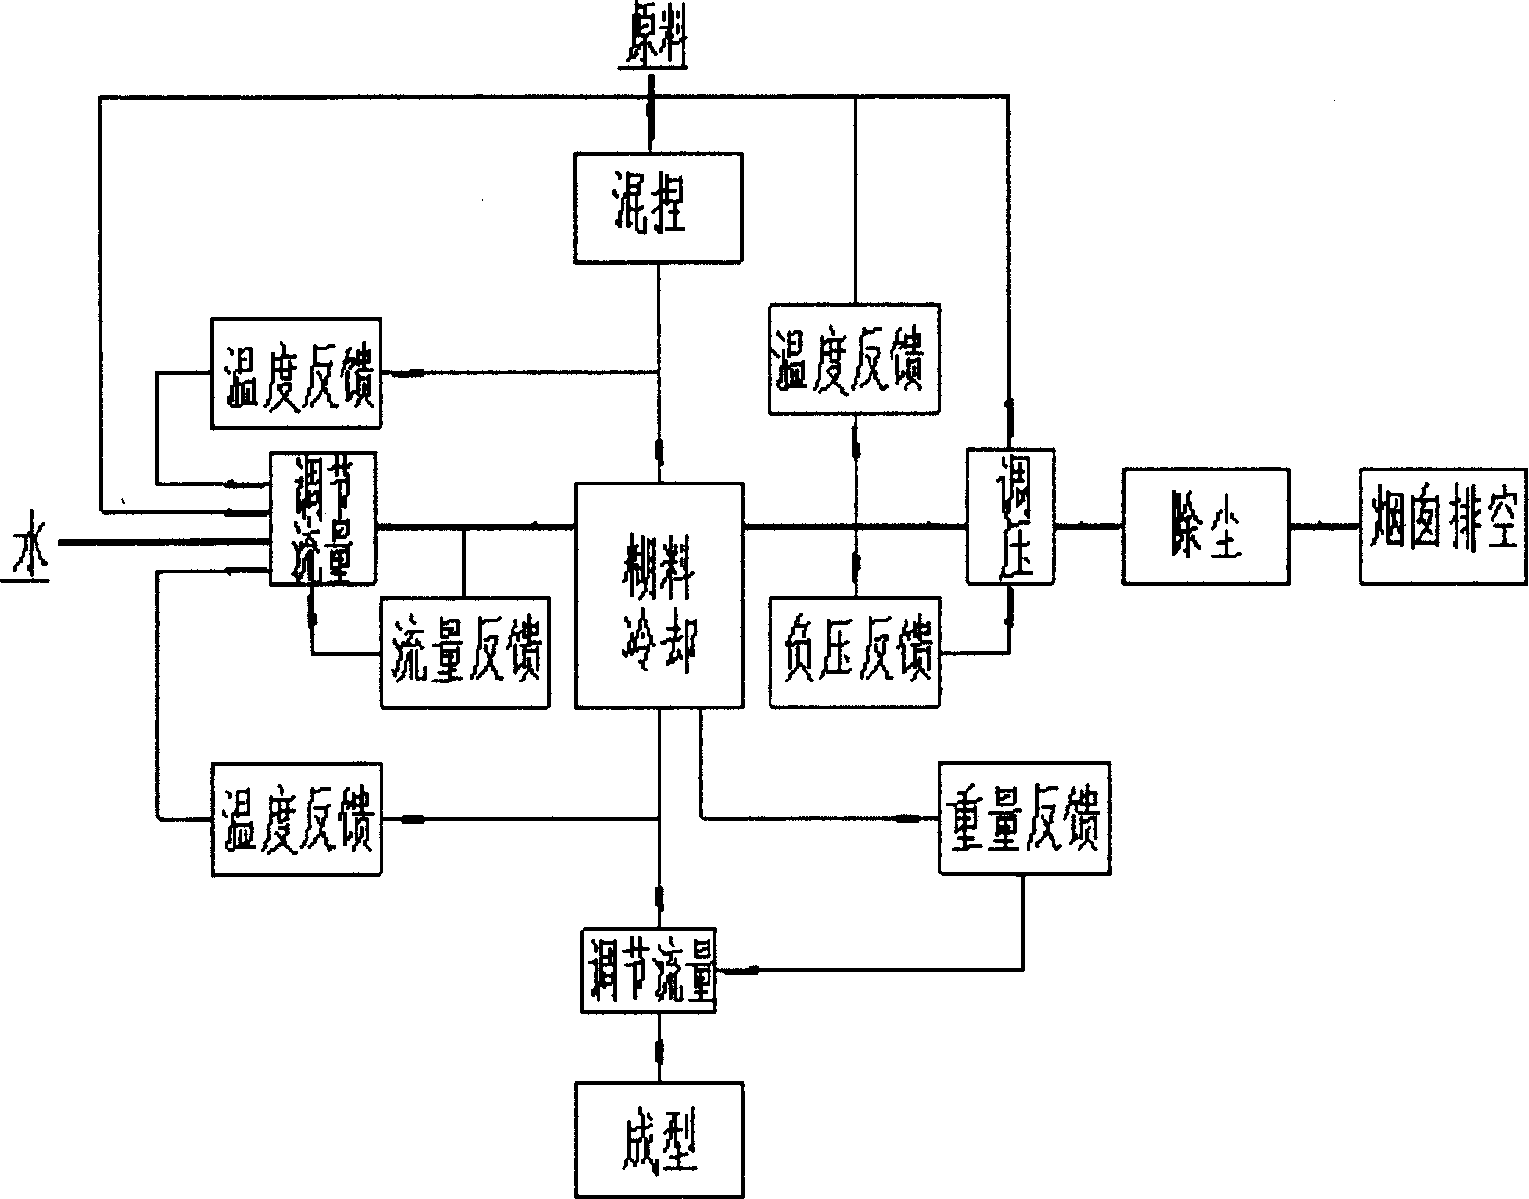 Process for producing anode paste by direct water spraying and continuous cooling and complete equipment set